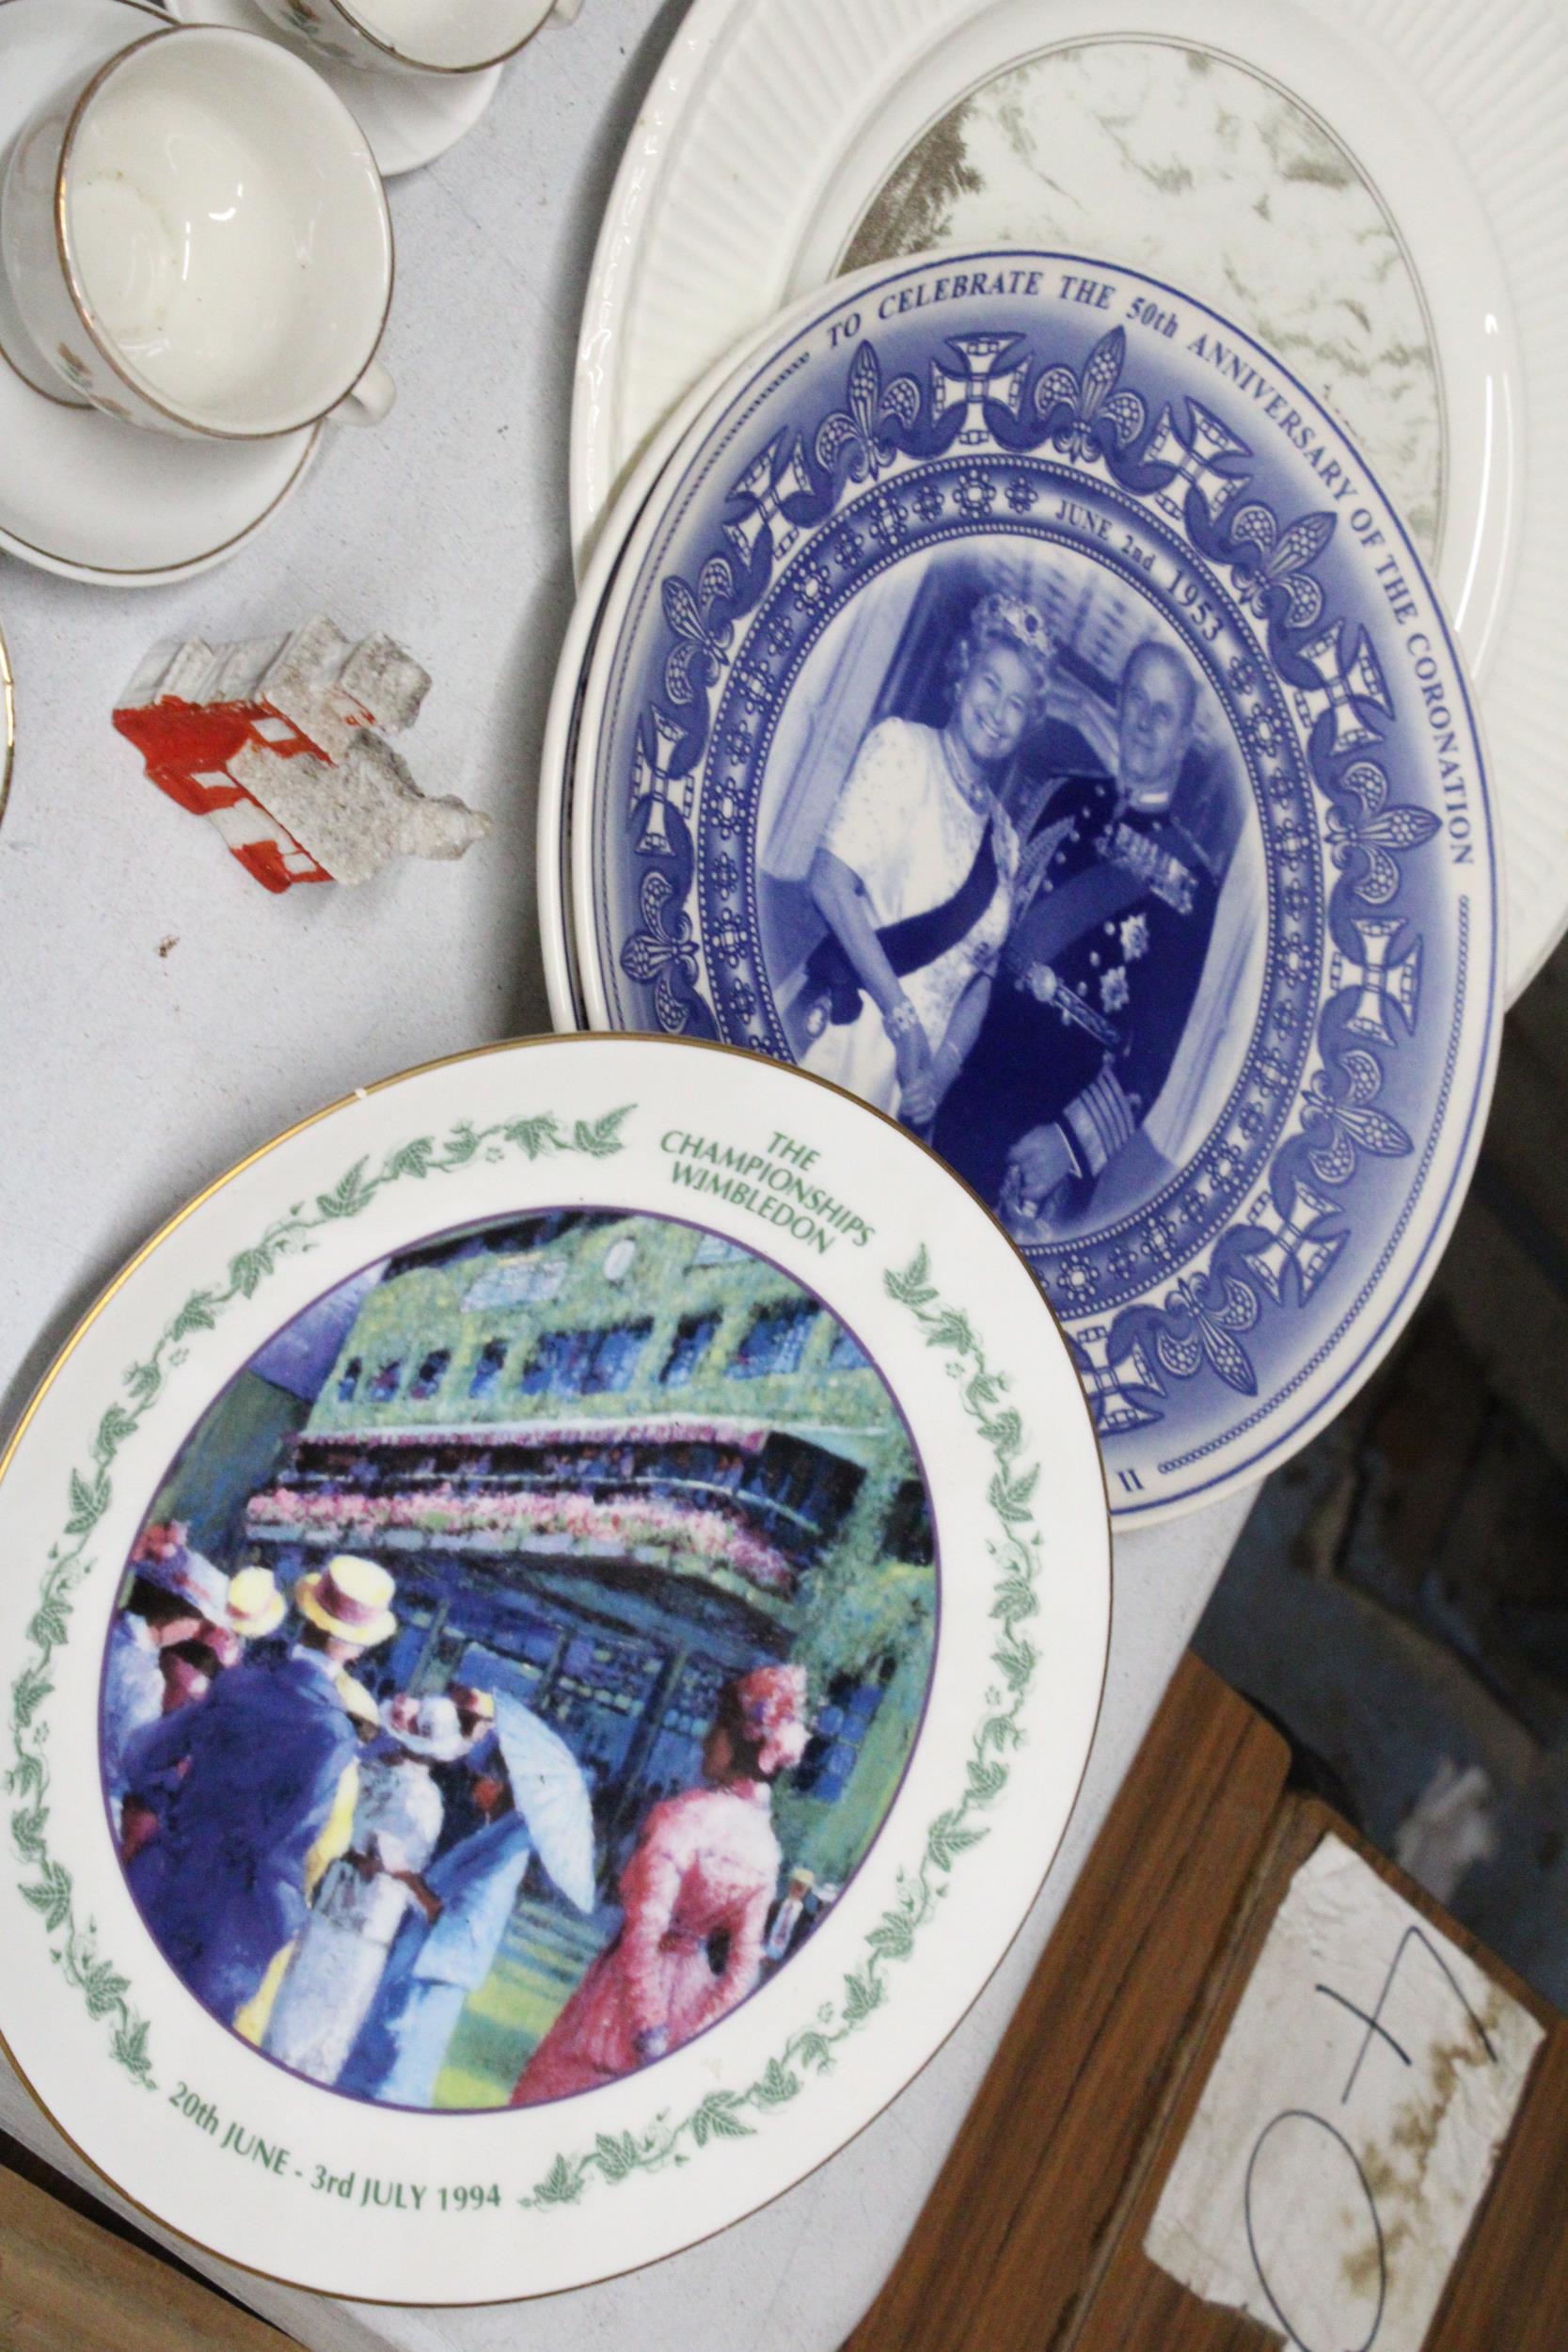 A MIXED LOT OF CERAMICS TO INCLUDE SPODE LARGE WARING AND GILLOW BOWLS, CABINET PLATES, SMALL CUPS - Image 2 of 5